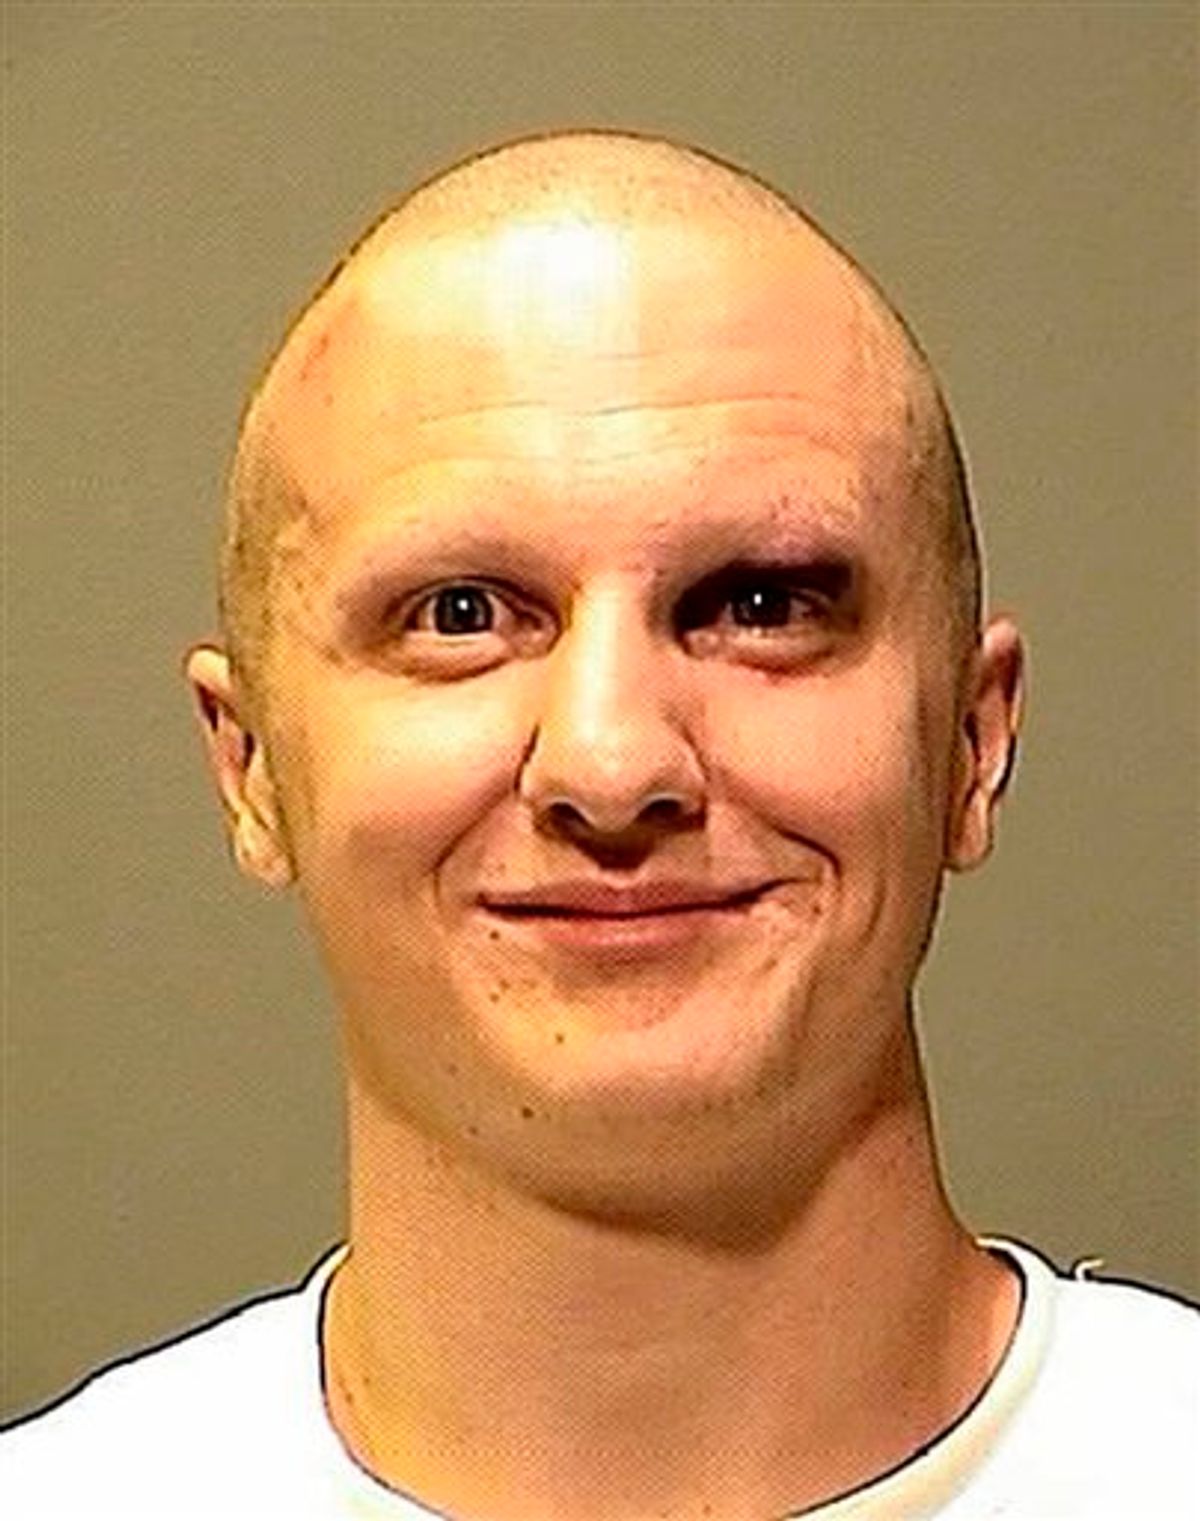 FILE - This Jan. 8, 2011 file photo released by the Pima County Sheriff's Office shows Jared Loughner, charged with shooting Rep. Gabrielle Giffords, D-Ariz. (AP Photo/Pima County Sheriff's Dept. via The Arizona Republic, File) (AP)